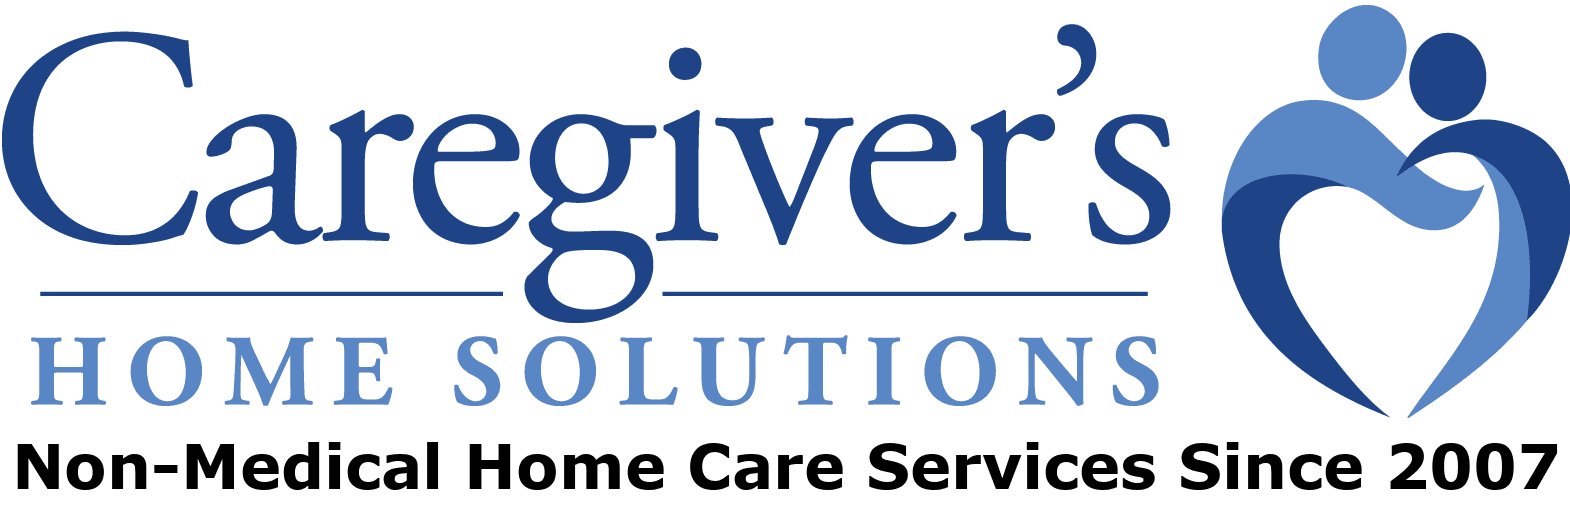 Caregiver's Home Solutions - Non-Medical Home Care Services Since 2007